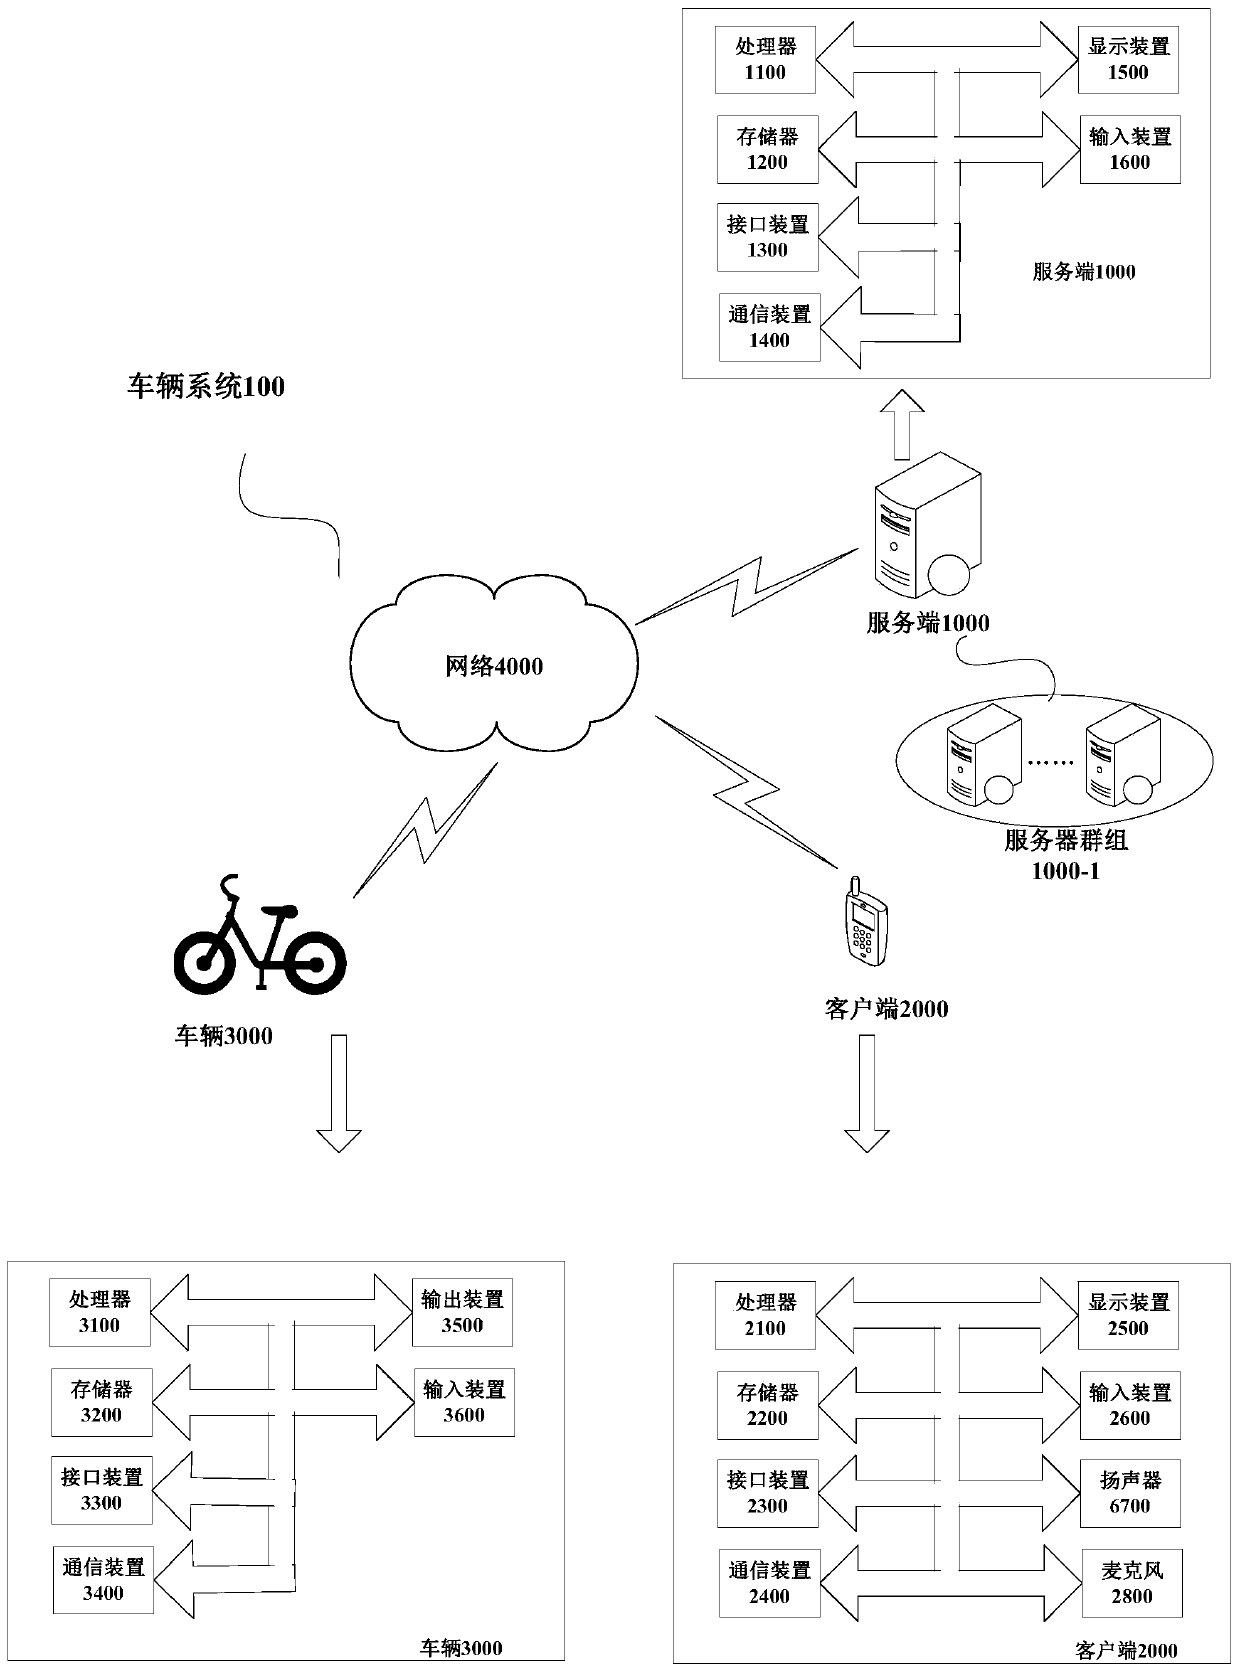 Vehicle dispatching method, server and system